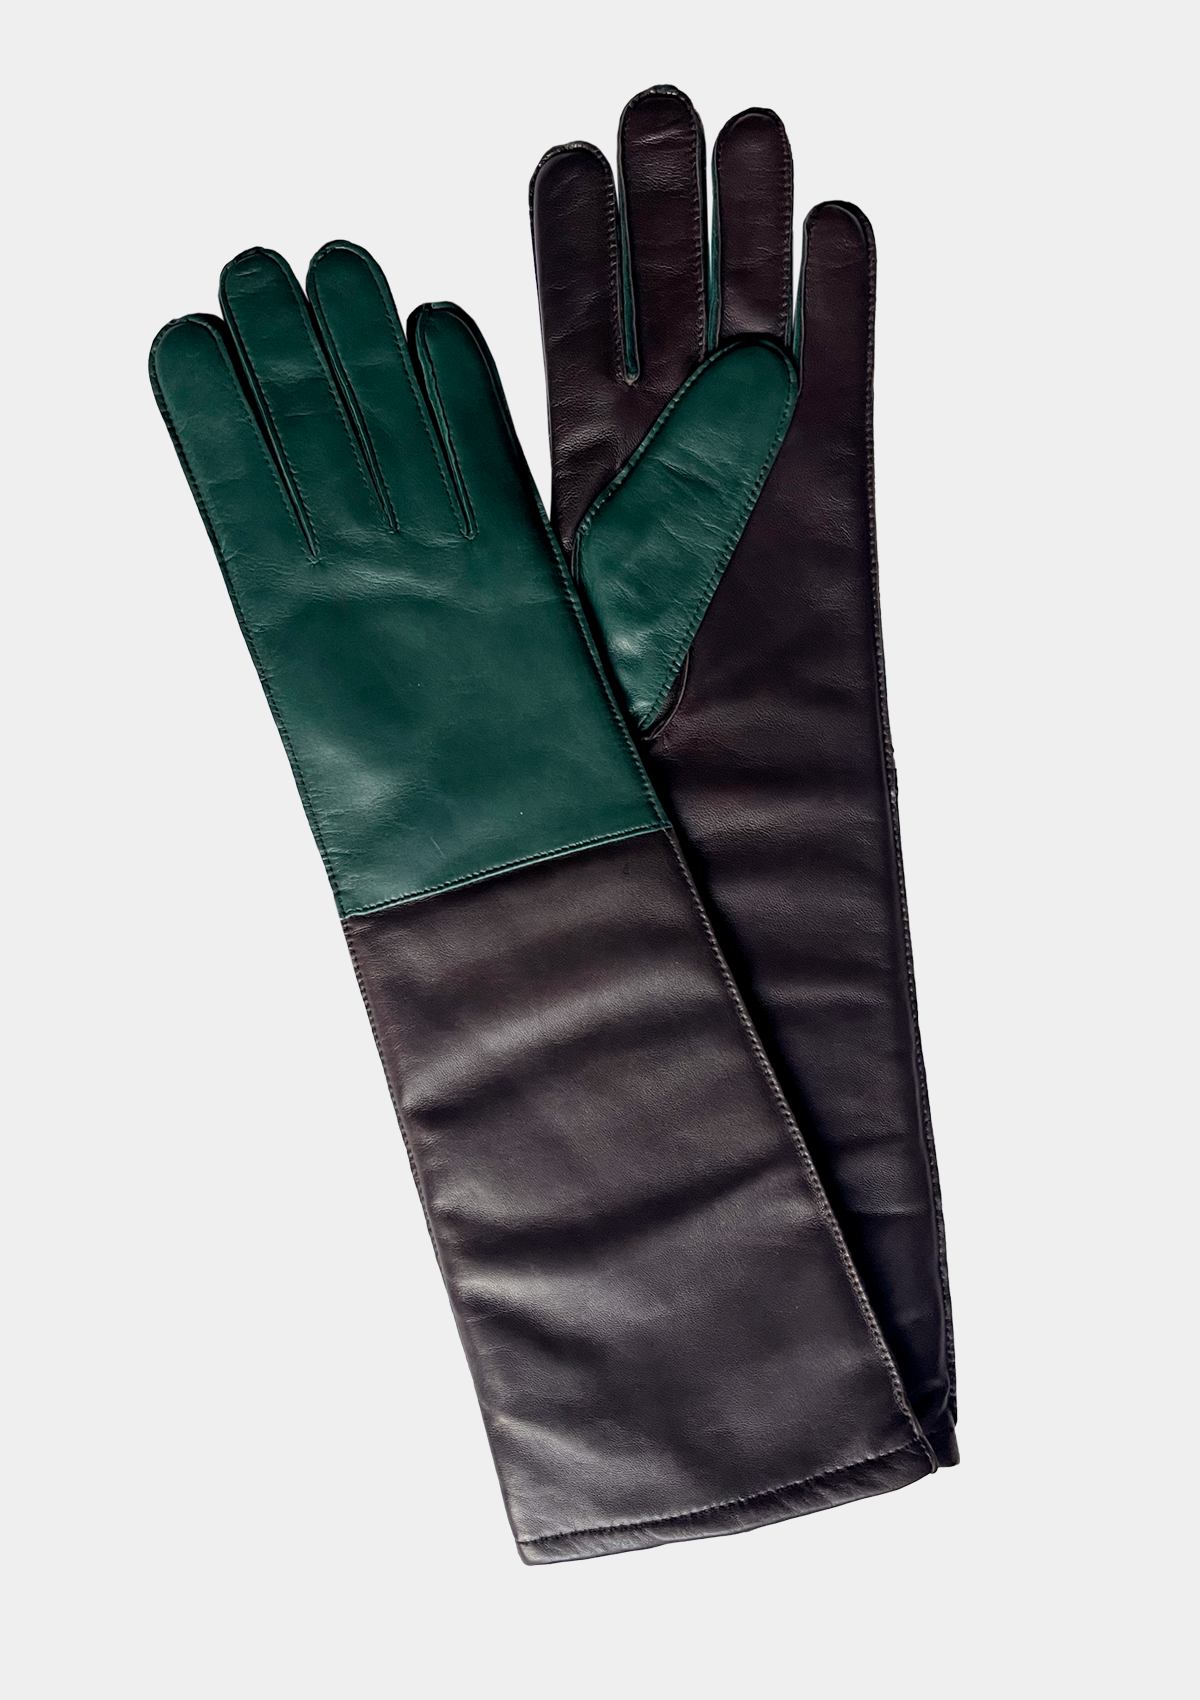 GREEN AND DARK BROWN COLORBLOCK GLOVES